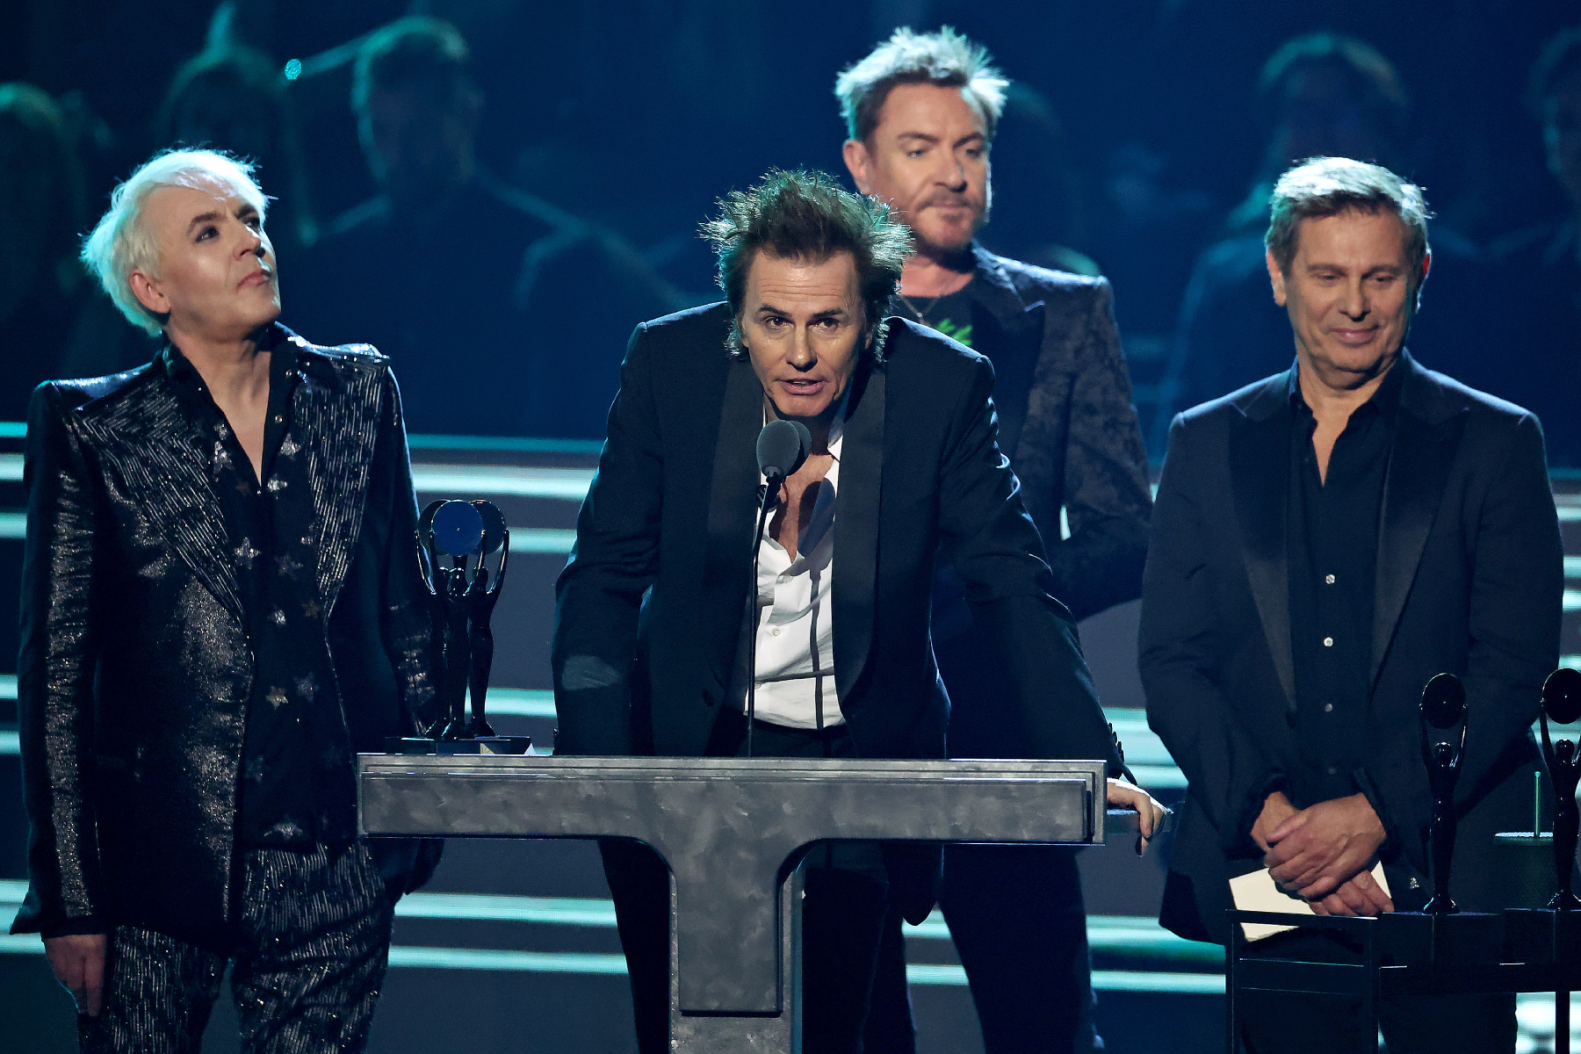 Duran Duran Honor Their Fans and the Bands That Inspired Them in ‘Rock & Roll Hall of Fame’ Speech